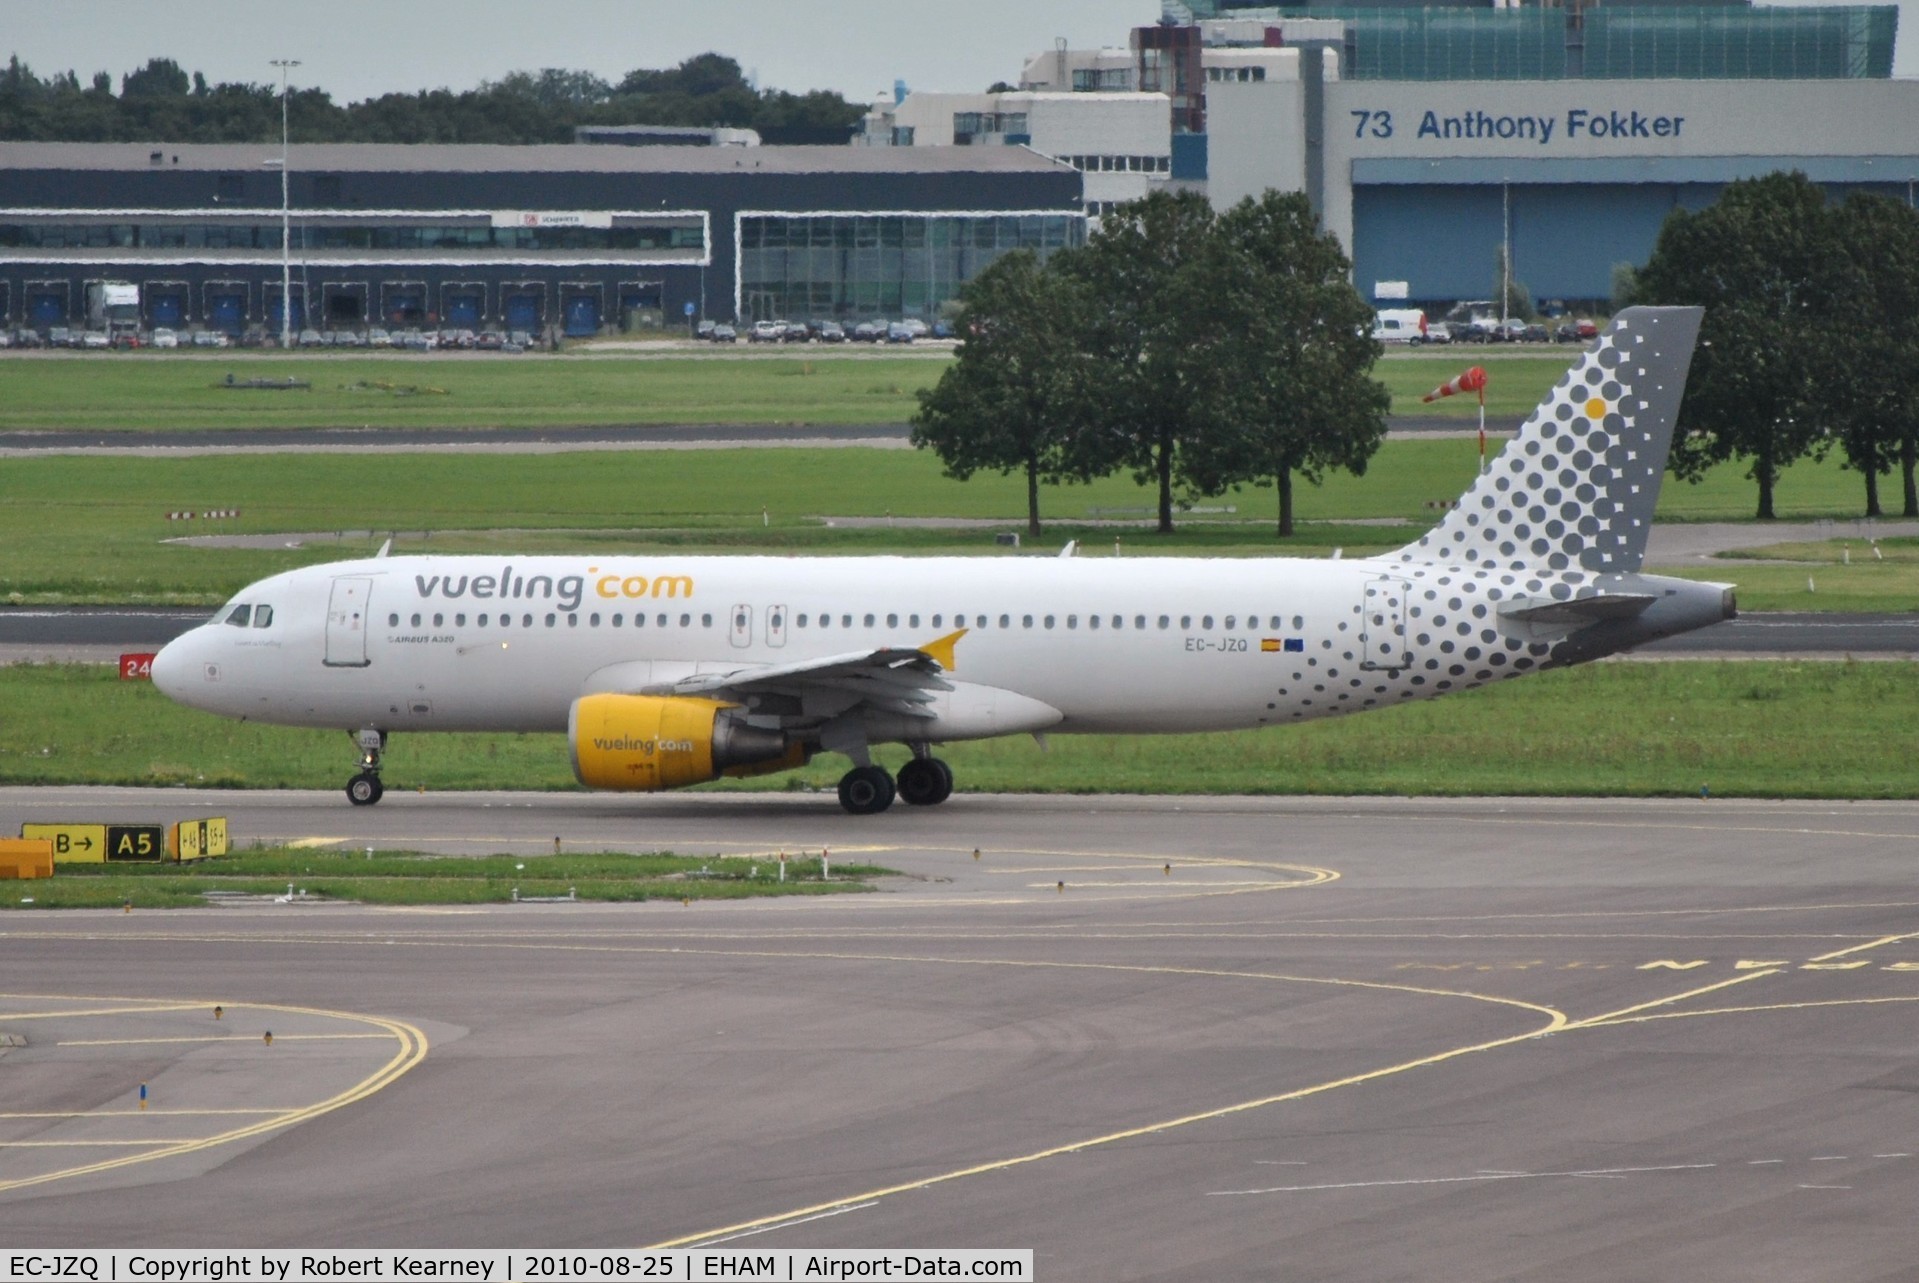 EC-JZQ, 1999 Airbus A320-214 C/N 992, Vueling taxiing out for take-off